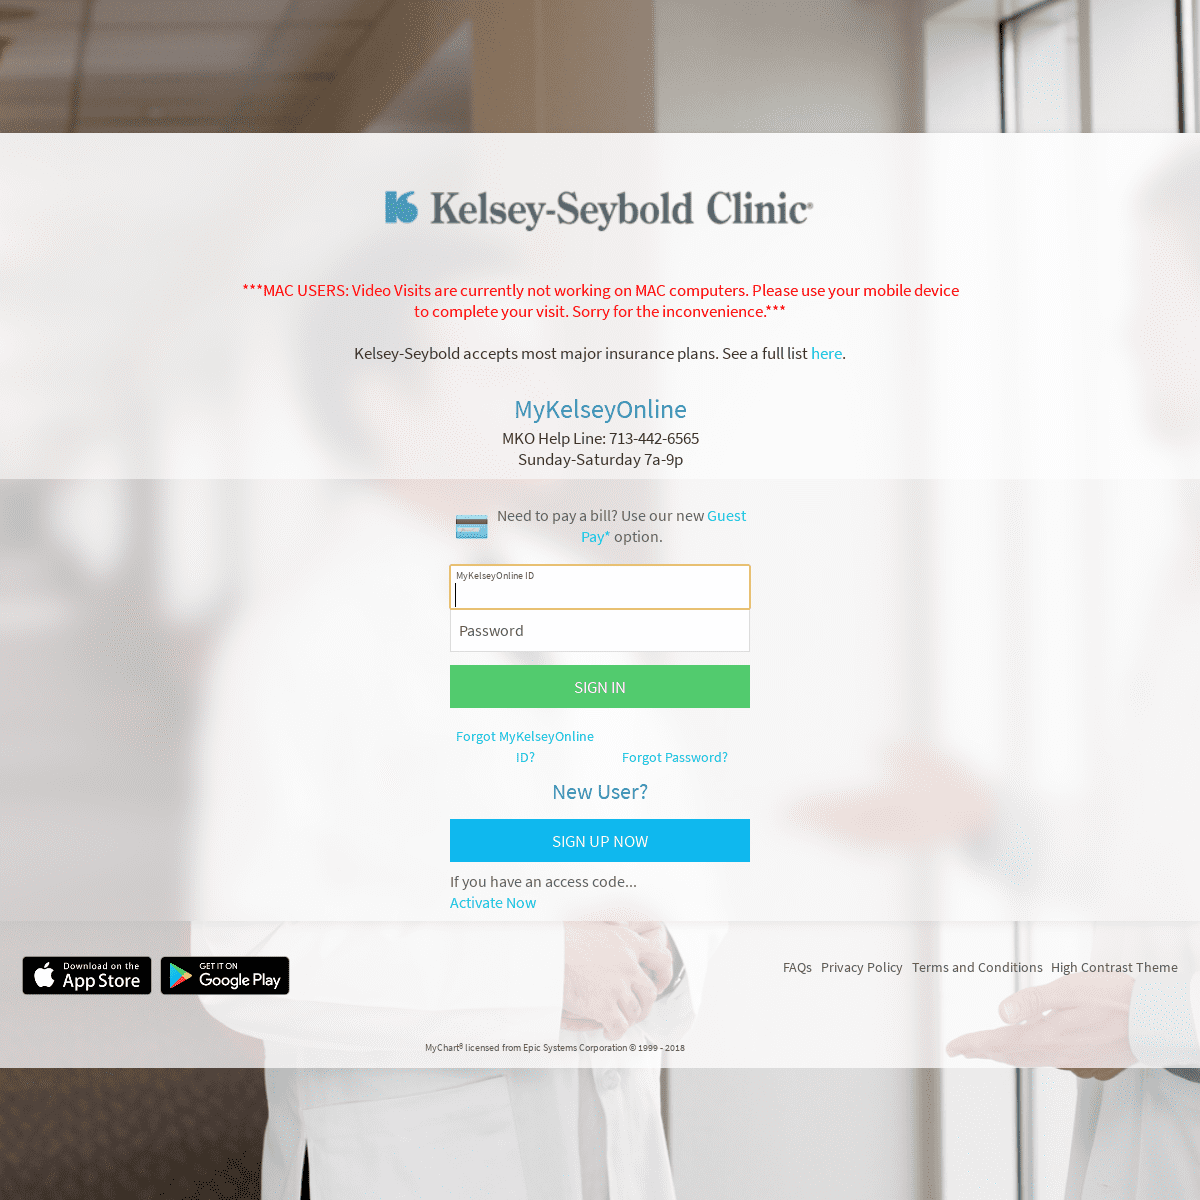 A complete backup of mykelseyonline.com